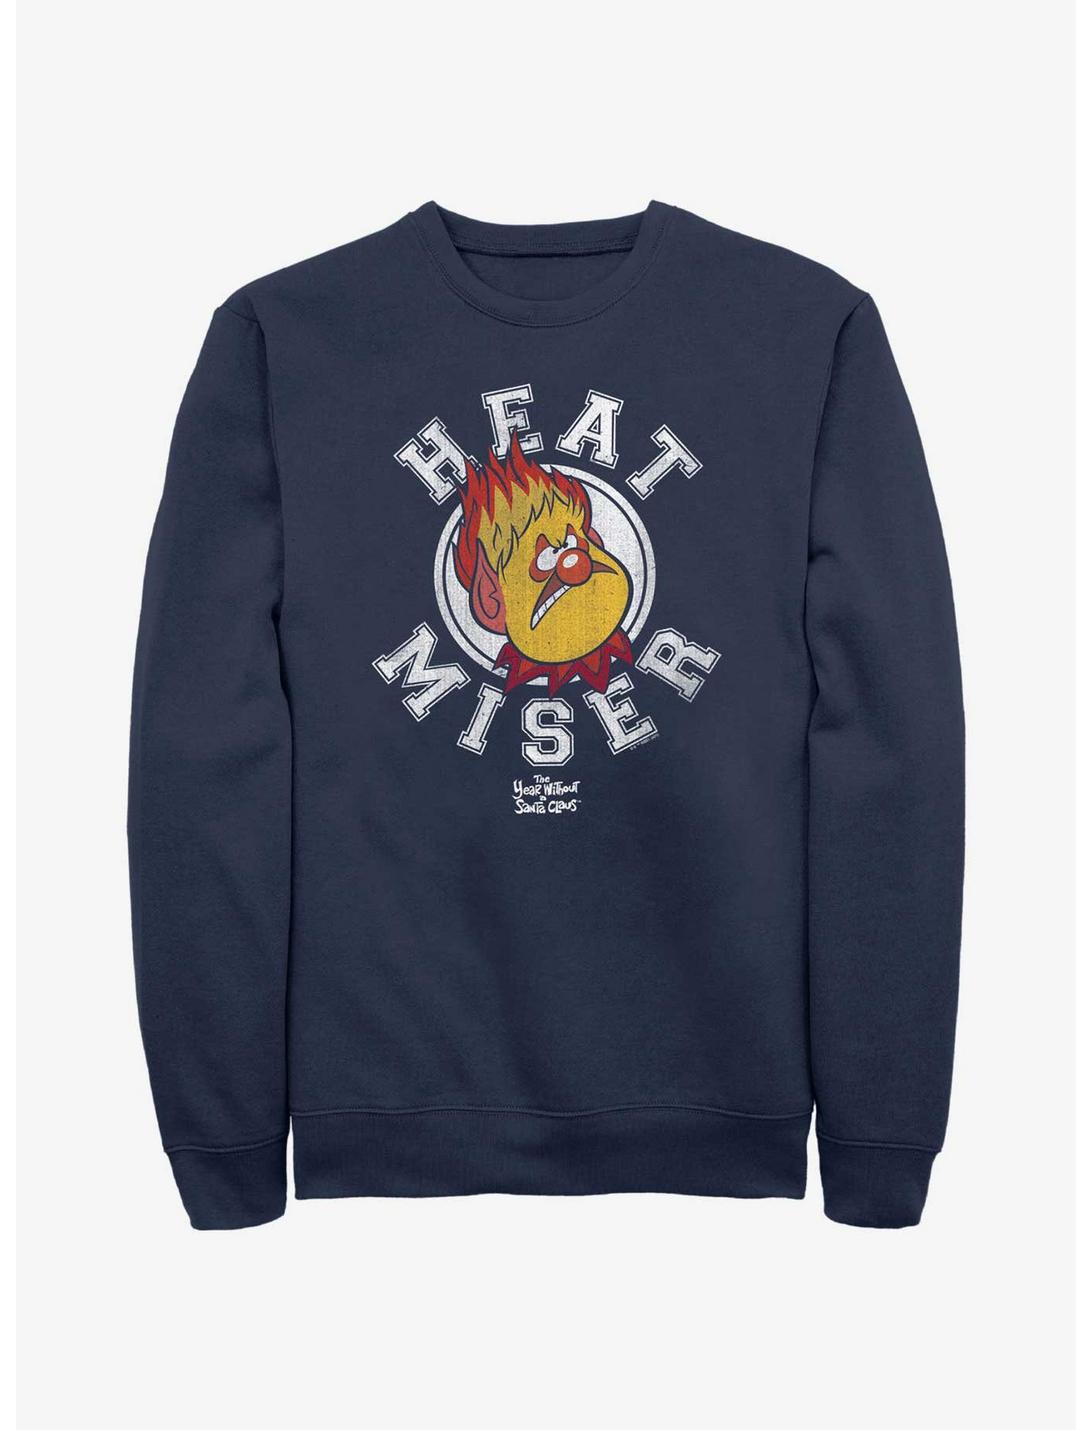 The Year Without a Santa Claus Heat Miser Collegiate Sweatshirt, NAVY, hi-res